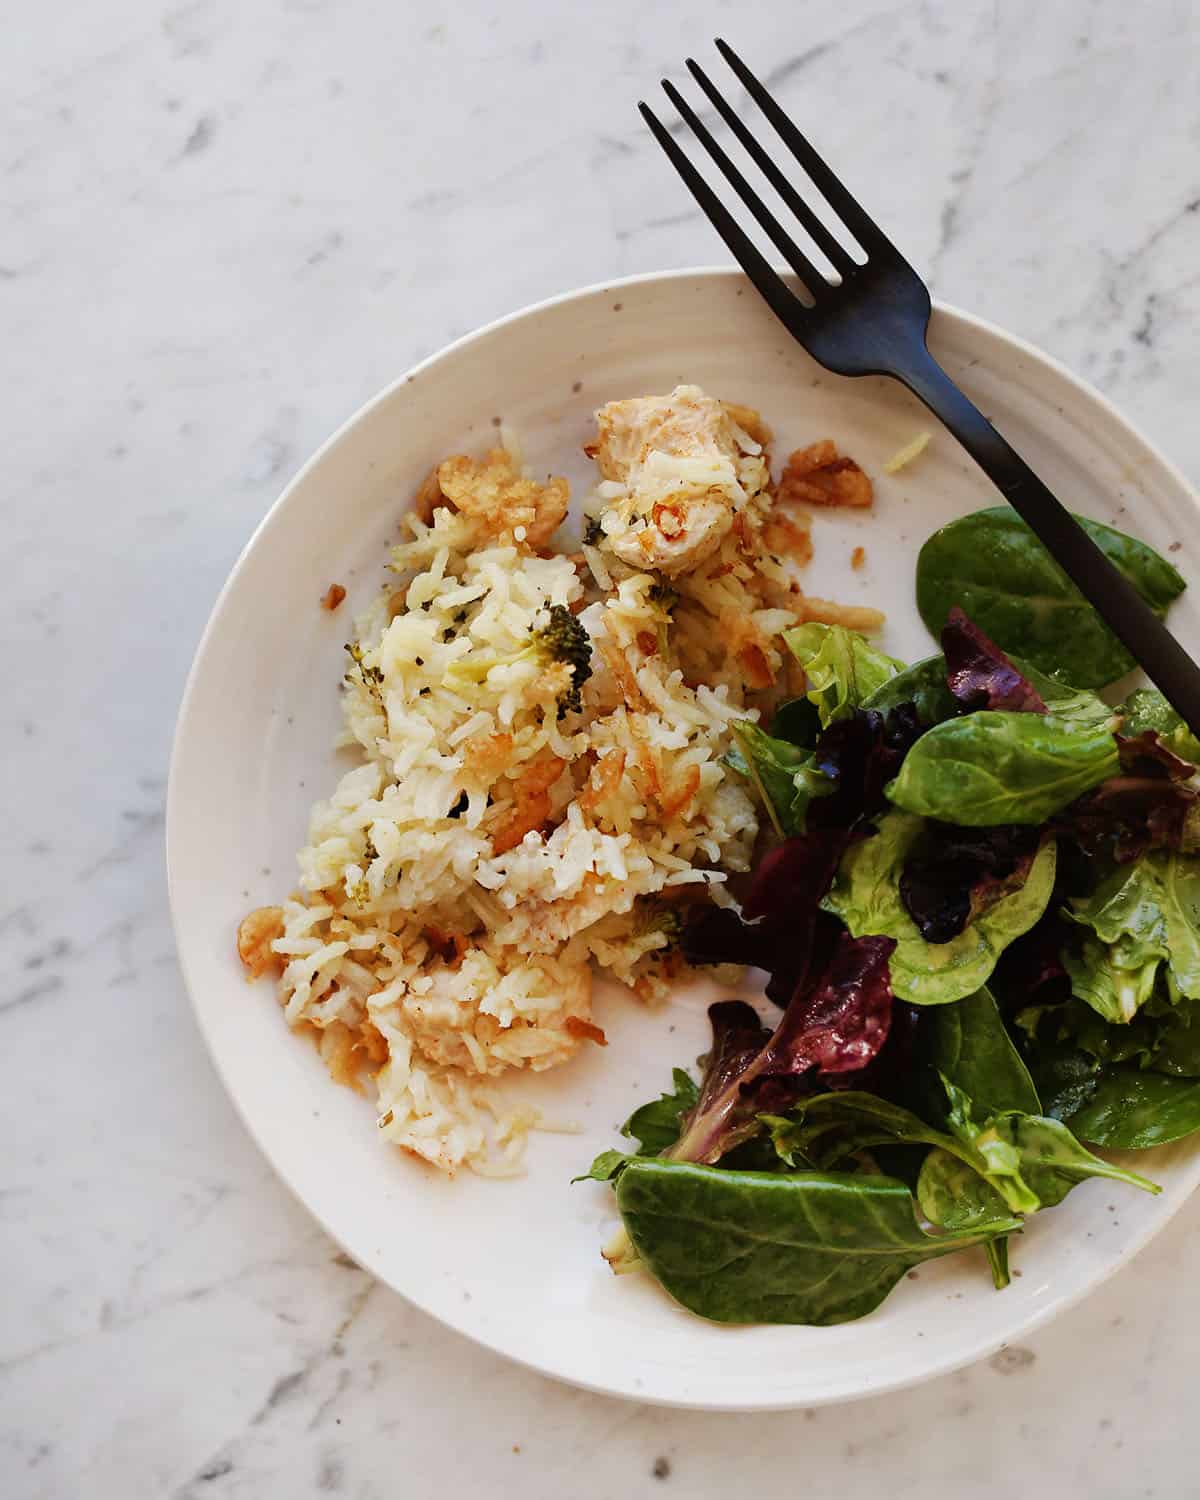 Chicken and rice casserole with salad